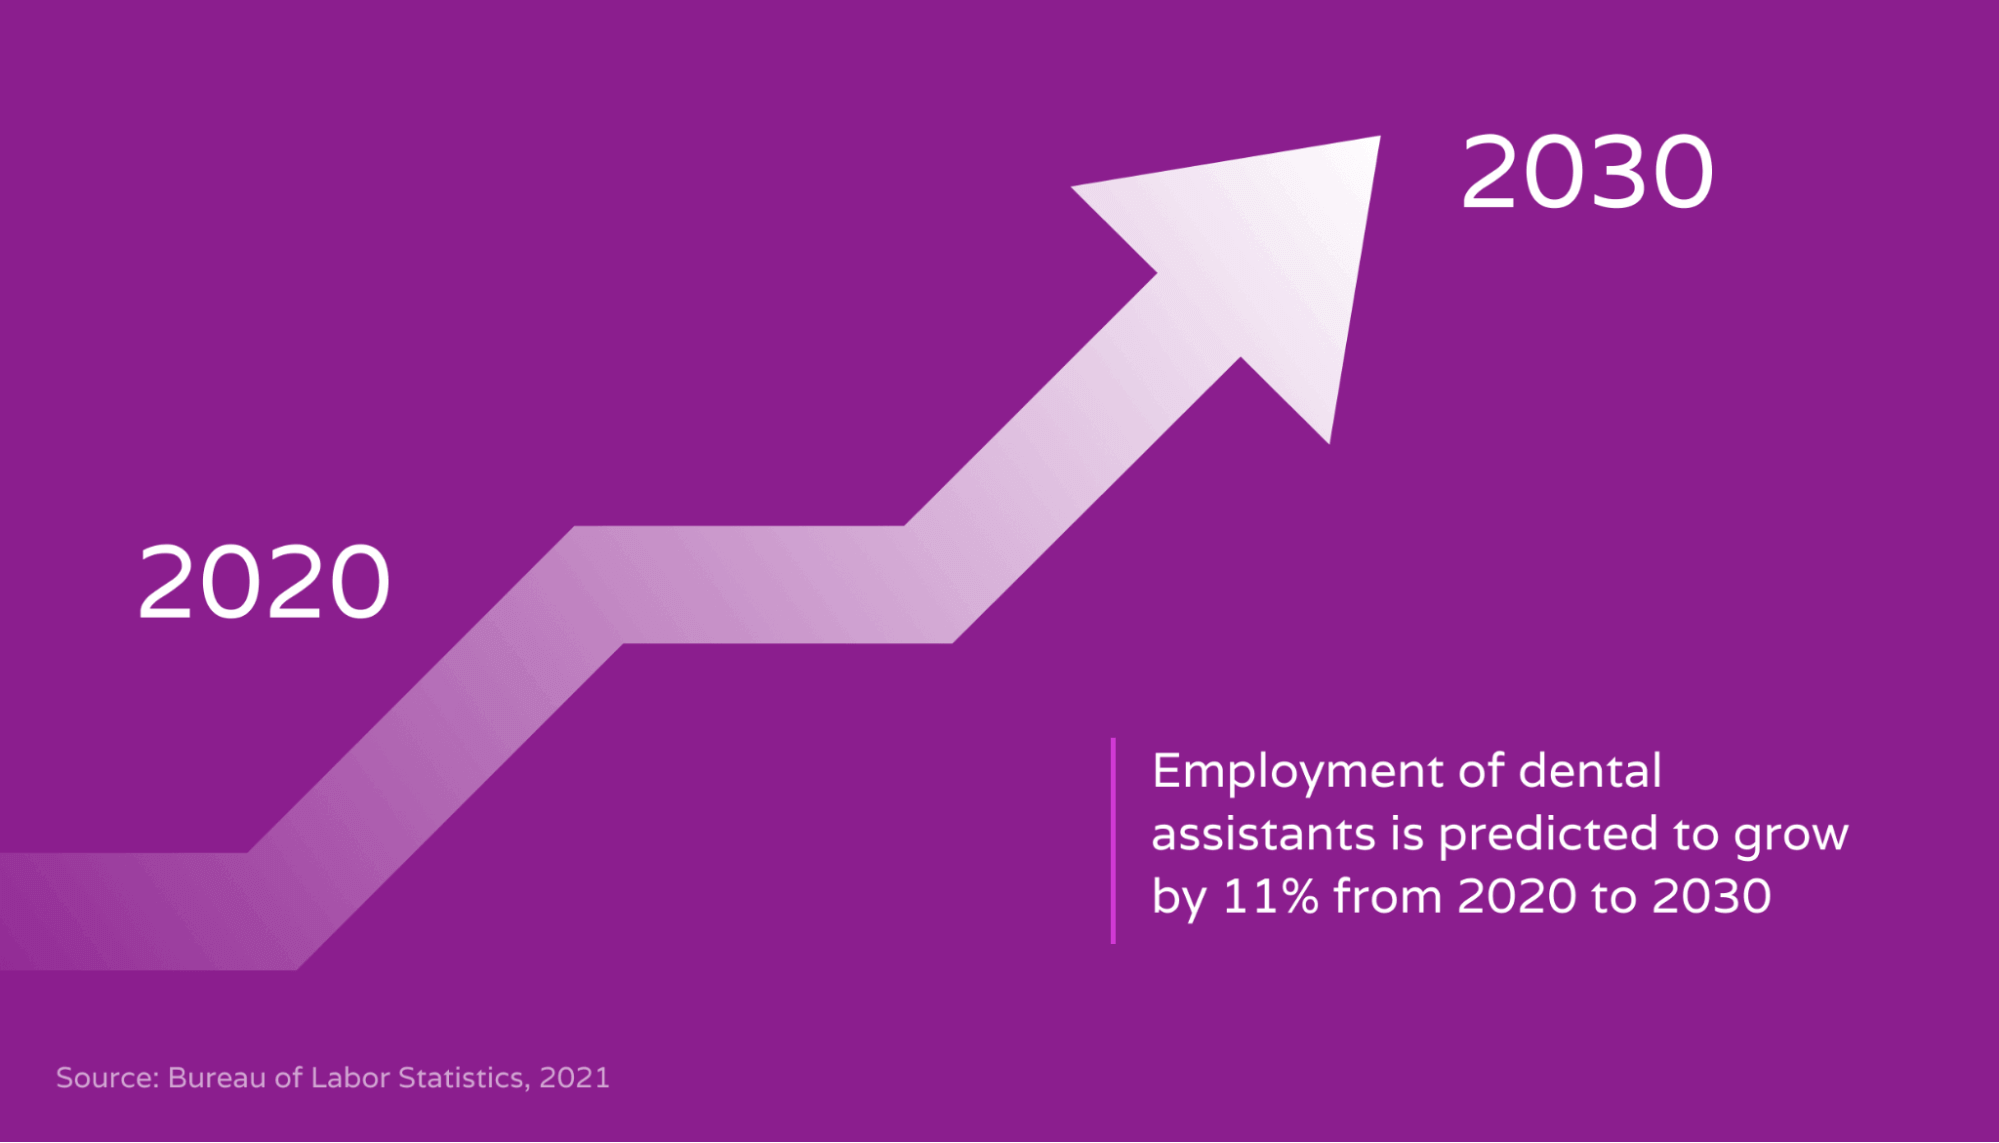 Image showing the increase in employment rate of dental assistants from 2020 to 2030 in the US